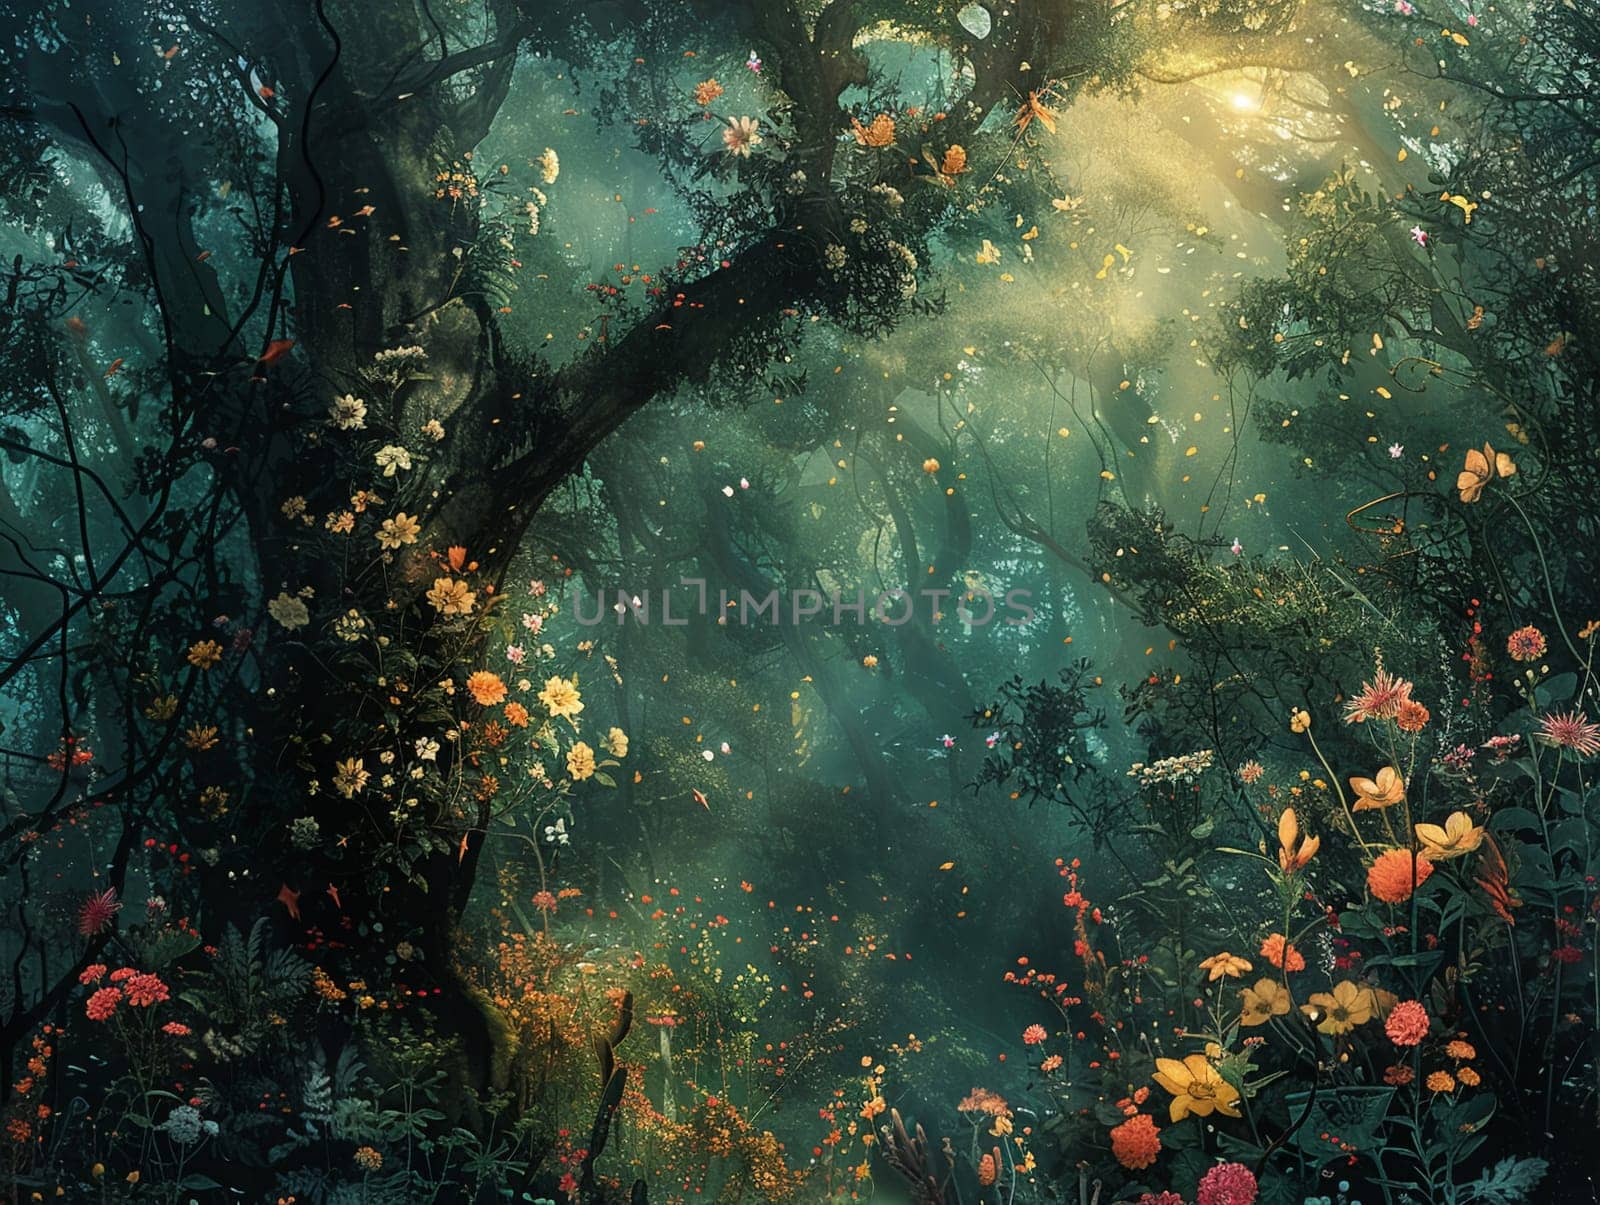 Photoshop creation of an enchanted forest, filled with whimsical creatures and foliage.